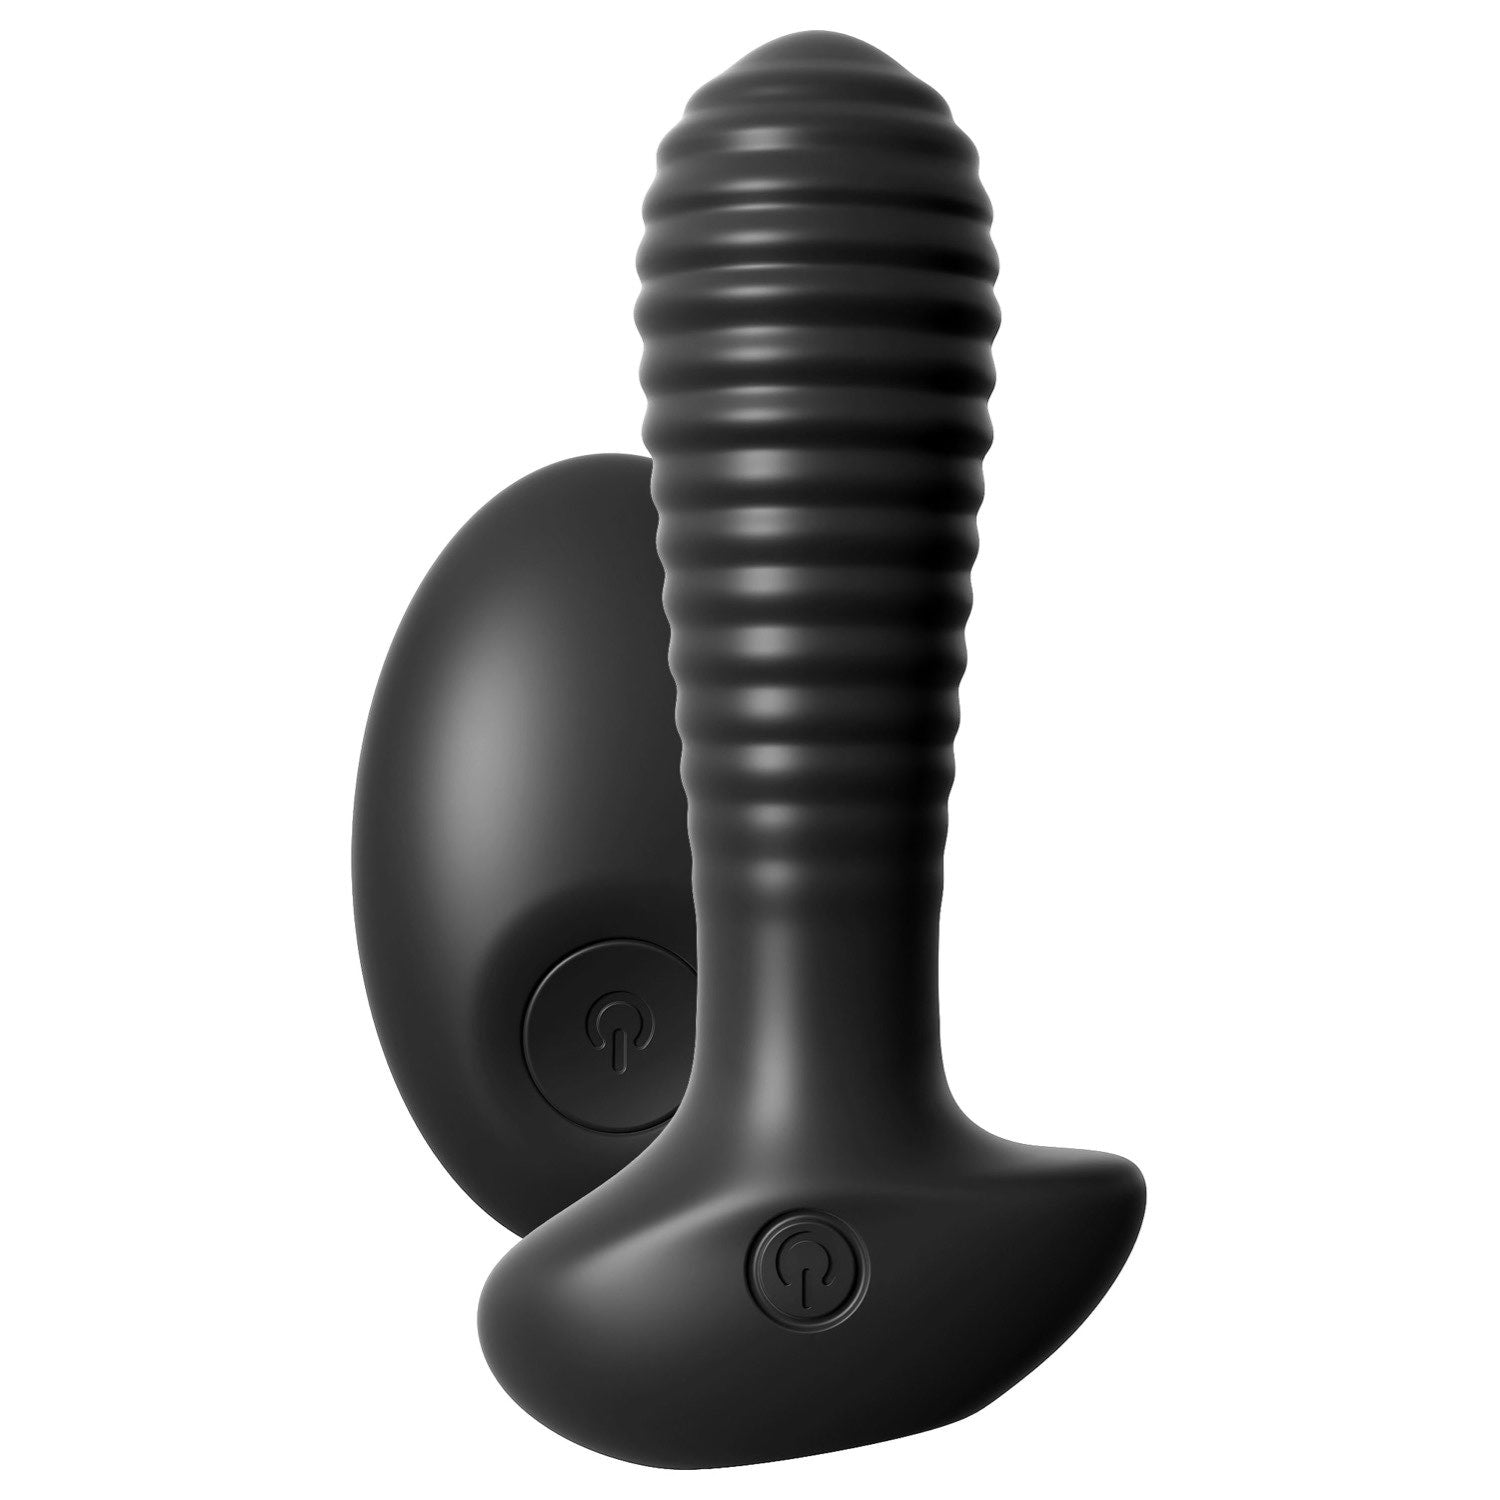 Anal Fantasy Elite Remote Control Anal Teaser - Black 11.9 cm (4.75&quot;) USB Rechargeable Anal Vibrator with Wireless Remote by Pipedream